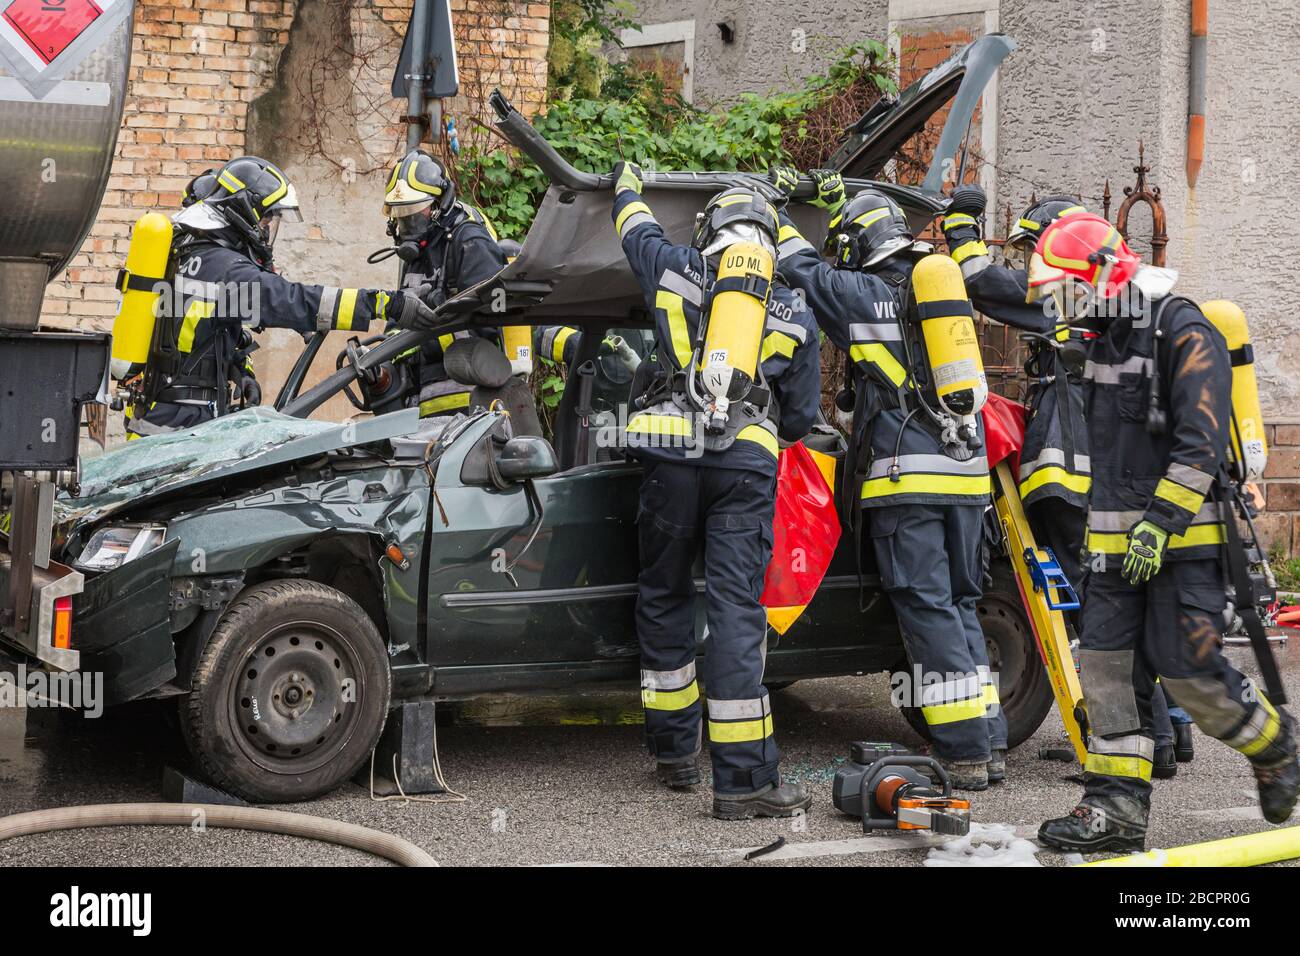 firefighters crewss rescue trapped driver during a road accident simulation with cars, train and trucks. firefighters with Breathing Apparatus and Hyd Stock Photo